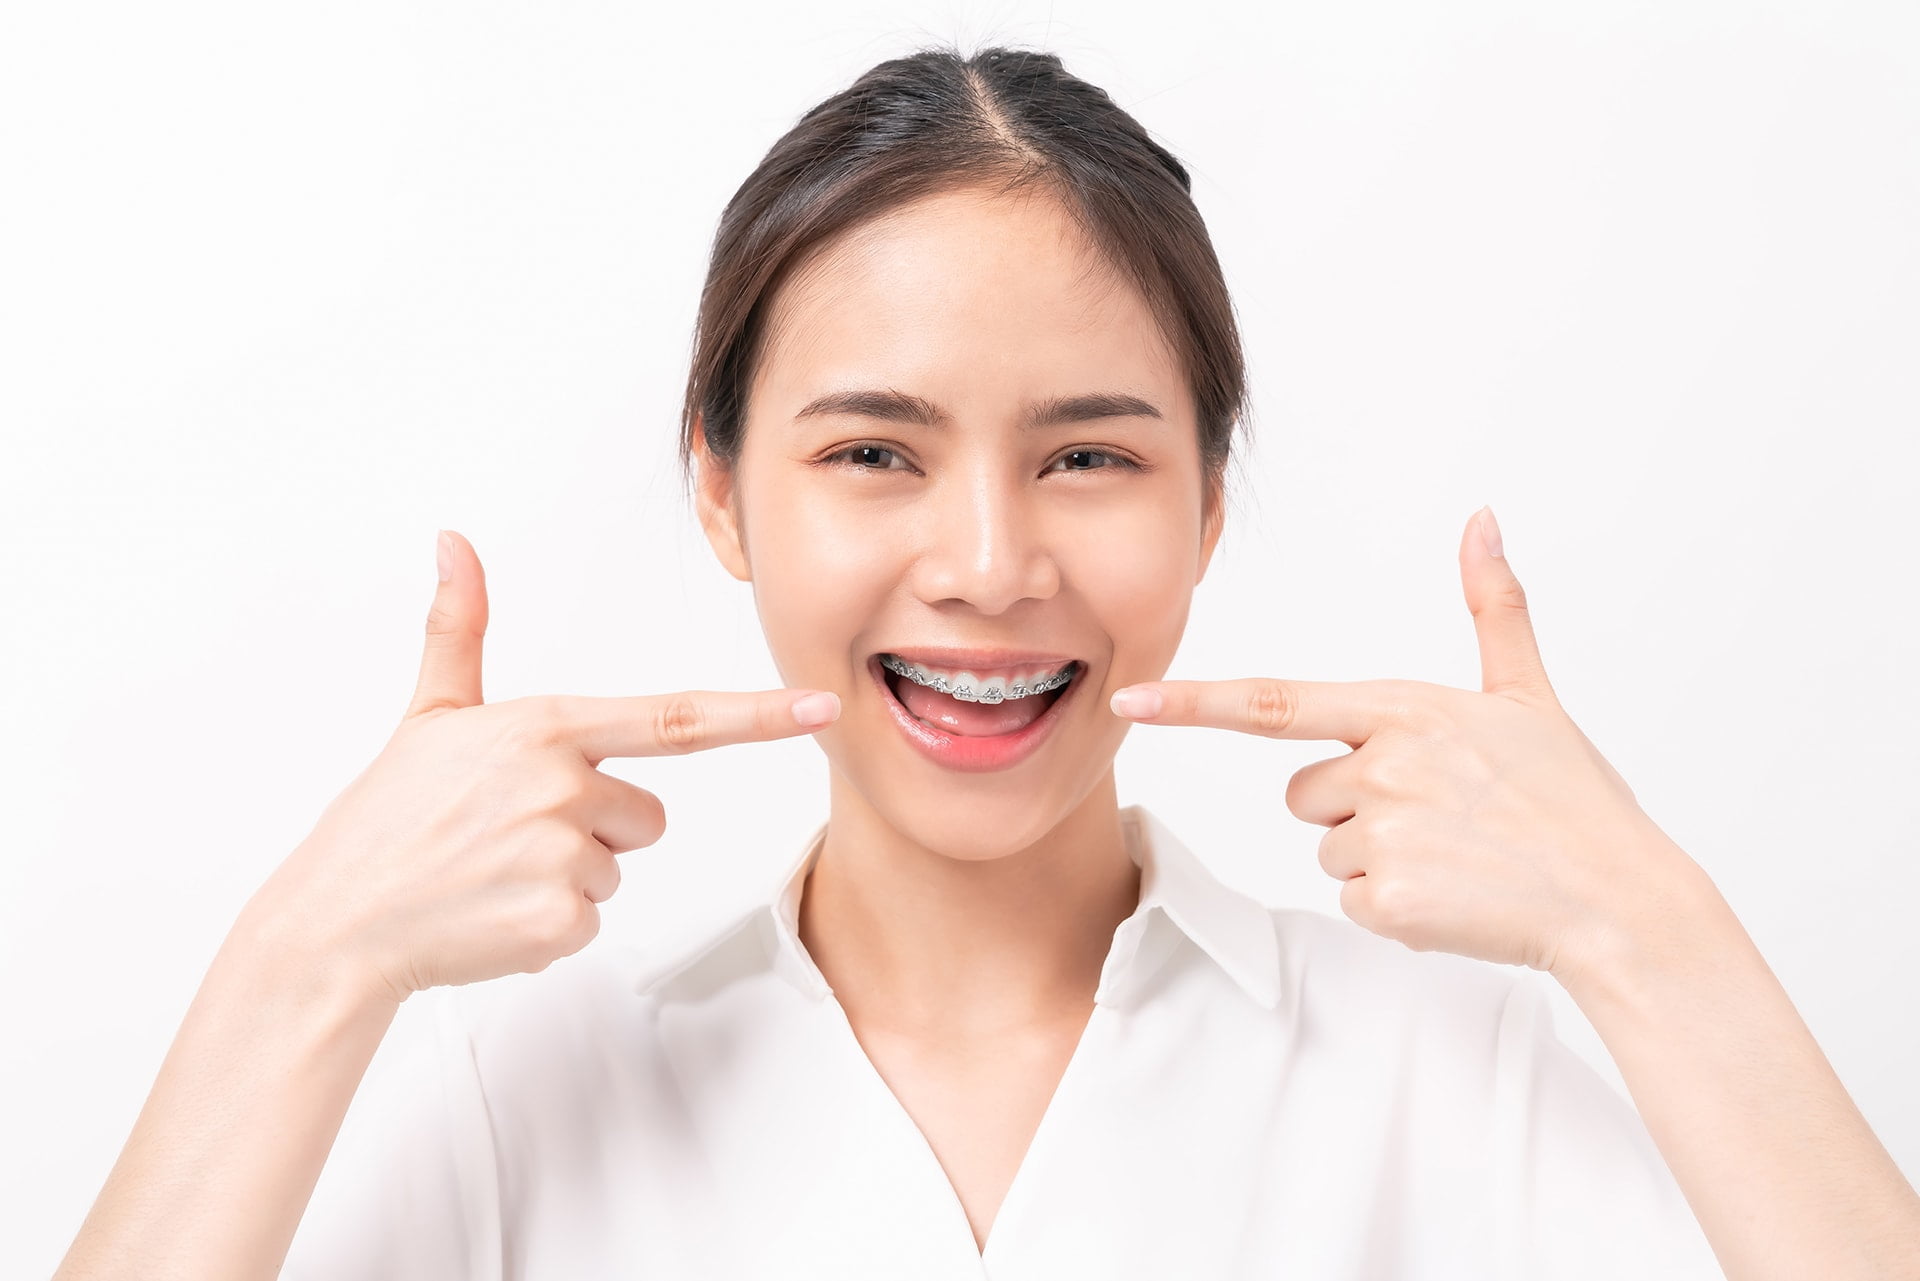 What should oral hygiene look like while wearing braces?